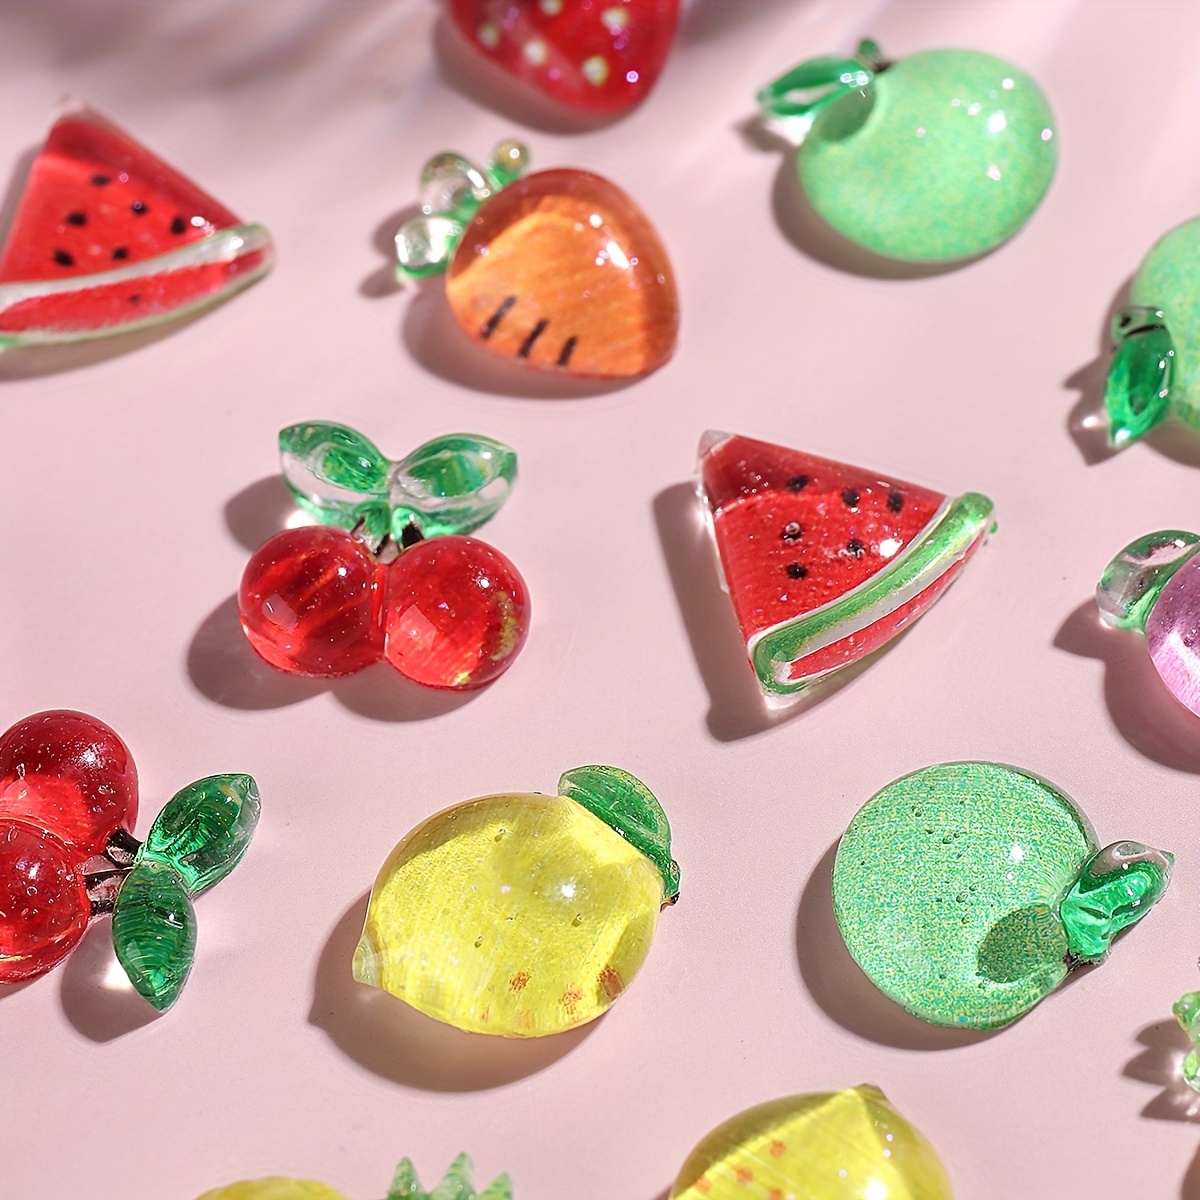 BAIYIYI 50PCS 3D Nail Charms Strawberry Fruit Resin Nail Art Charms Cute  Strawberry Design Flatback Slime Resin Charms for Acrylic Nails DIY Craft